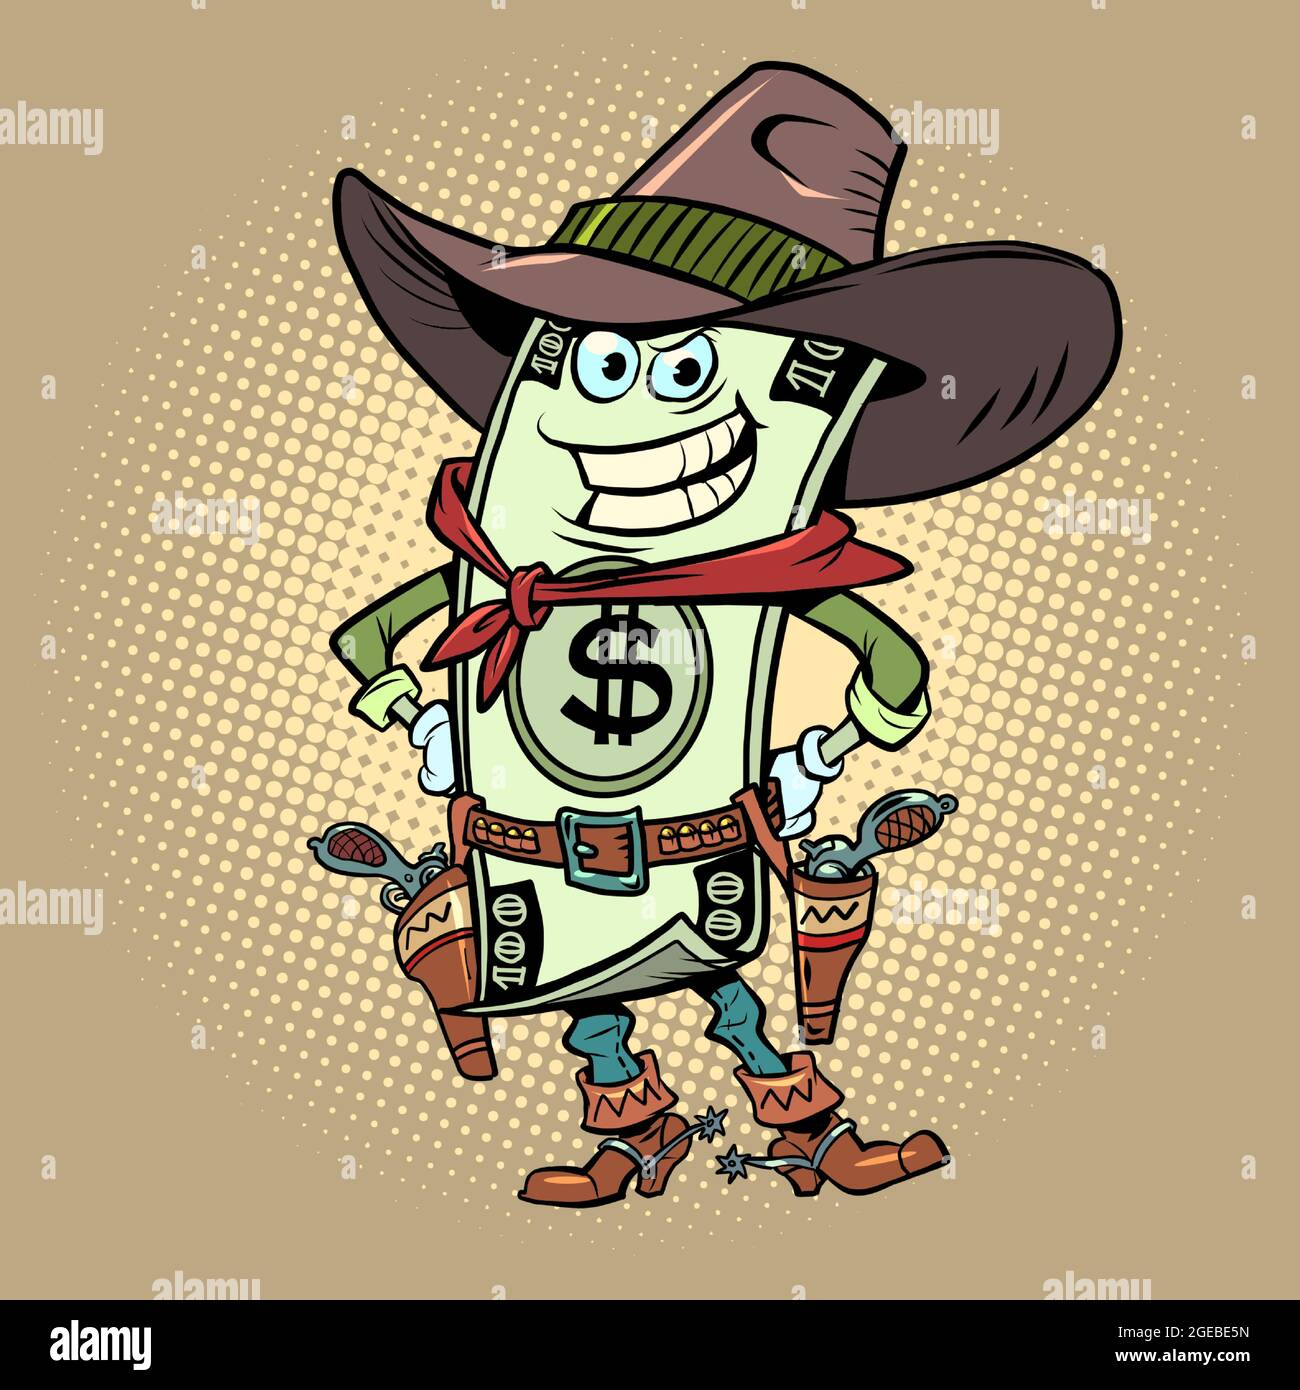 Dollar Money comical character of a cowboy sheriff from a western. Economics and Finance Stock Vector